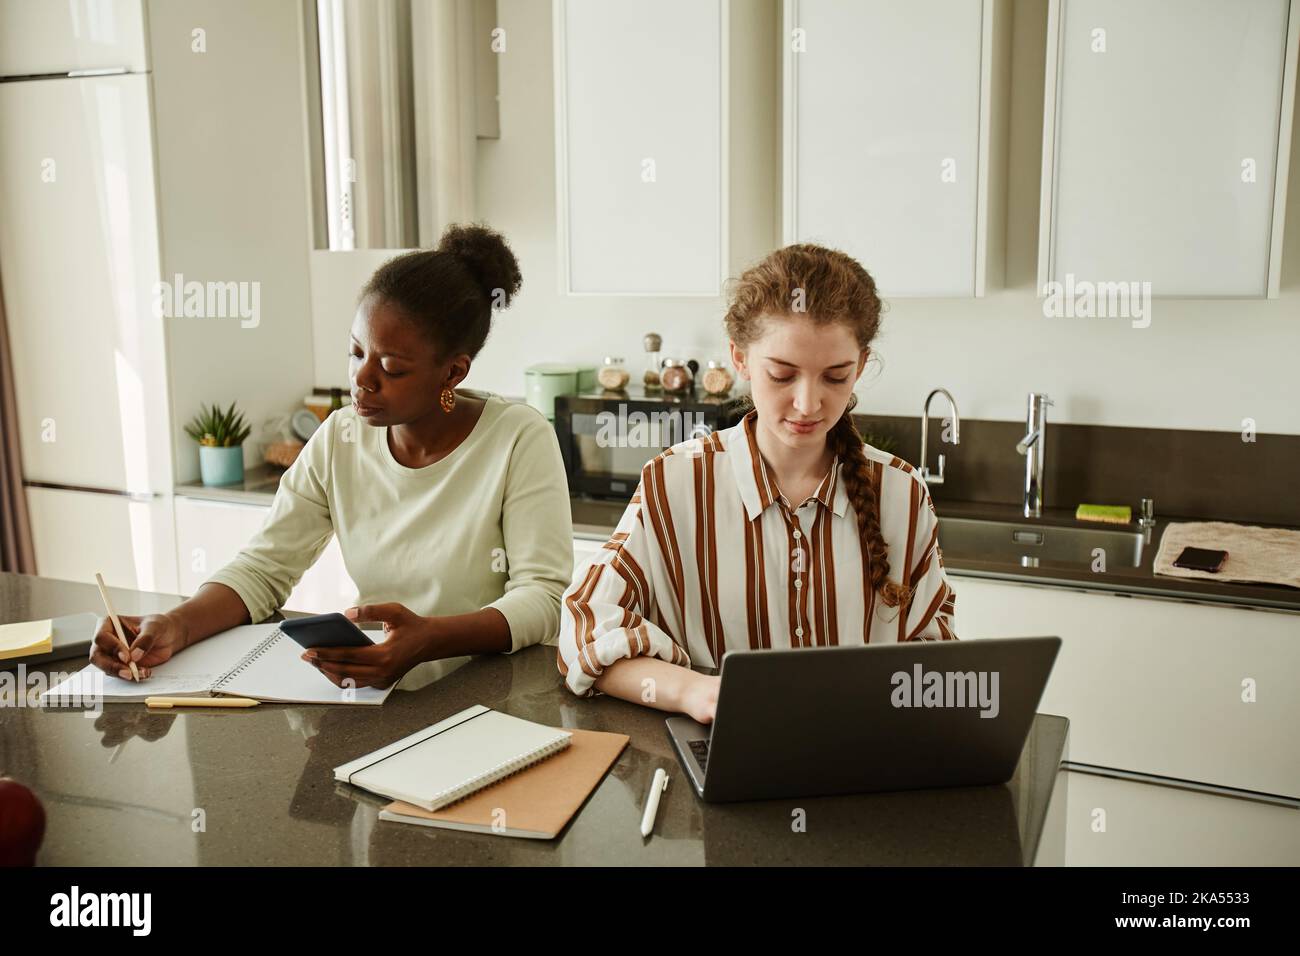 Portrait of two young businesswomen working together in minimal home interior, copy space Stock Photo